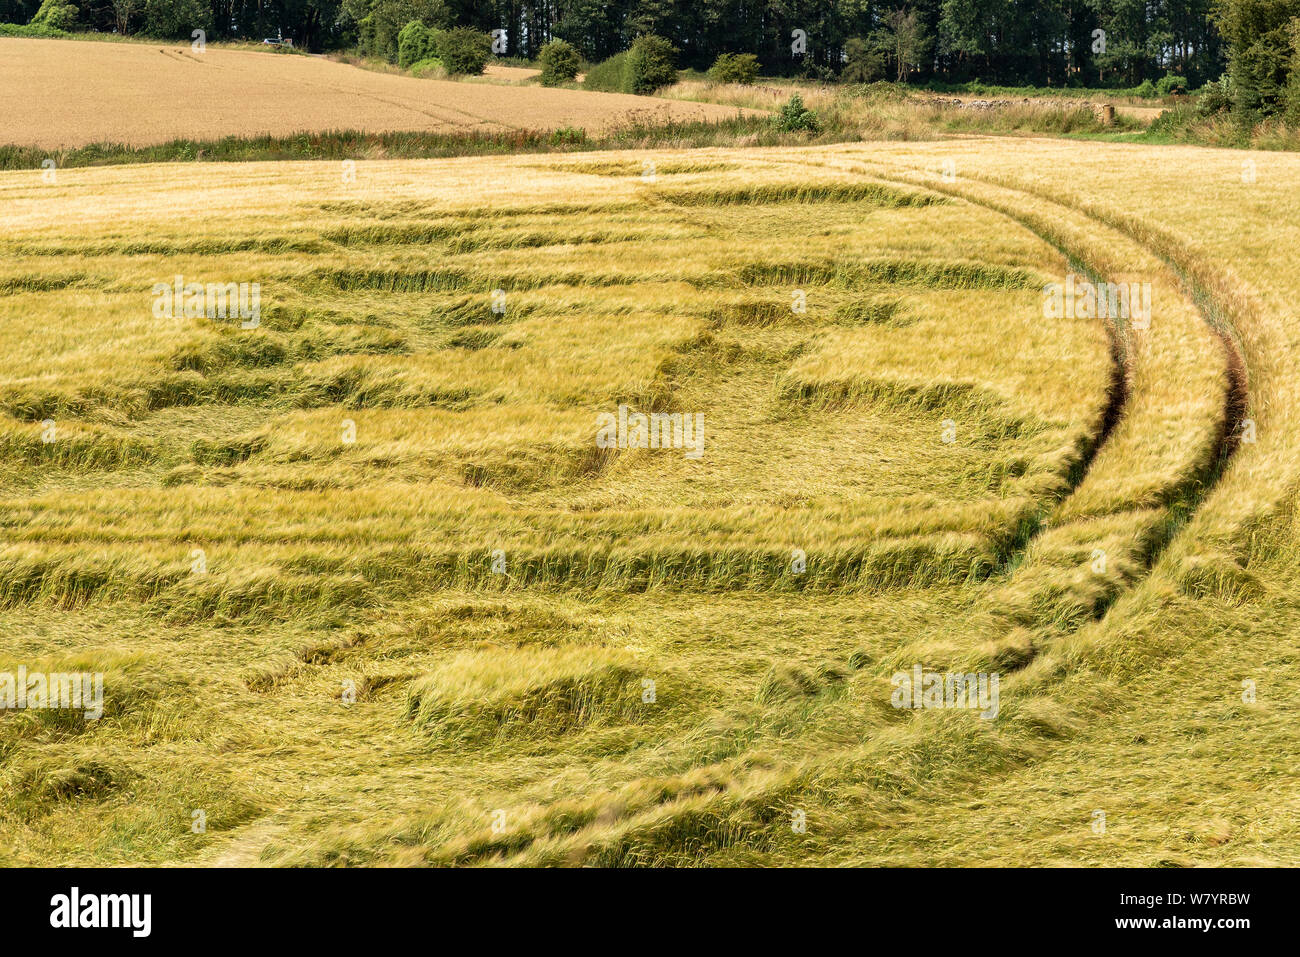 Cheltenham, Gloucestershire, England, UK.  Storm damaged crops in a farmers field much of the crop is laying flat after strong winds and heavy rain. Stock Photo